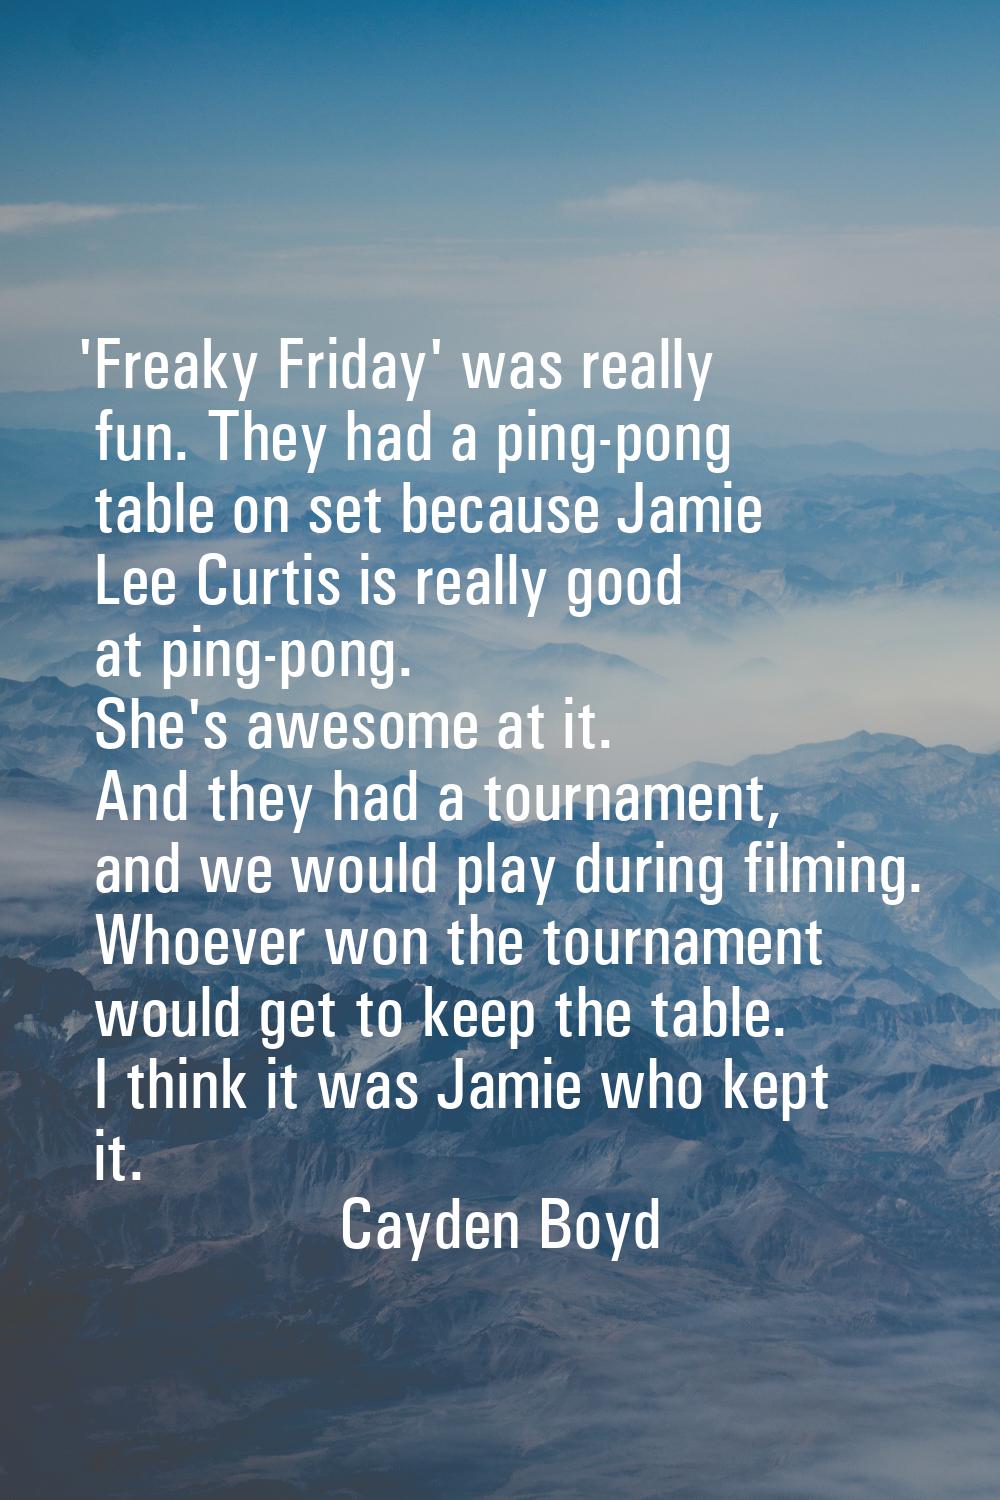 'Freaky Friday' was really fun. They had a ping-pong table on set because Jamie Lee Curtis is reall